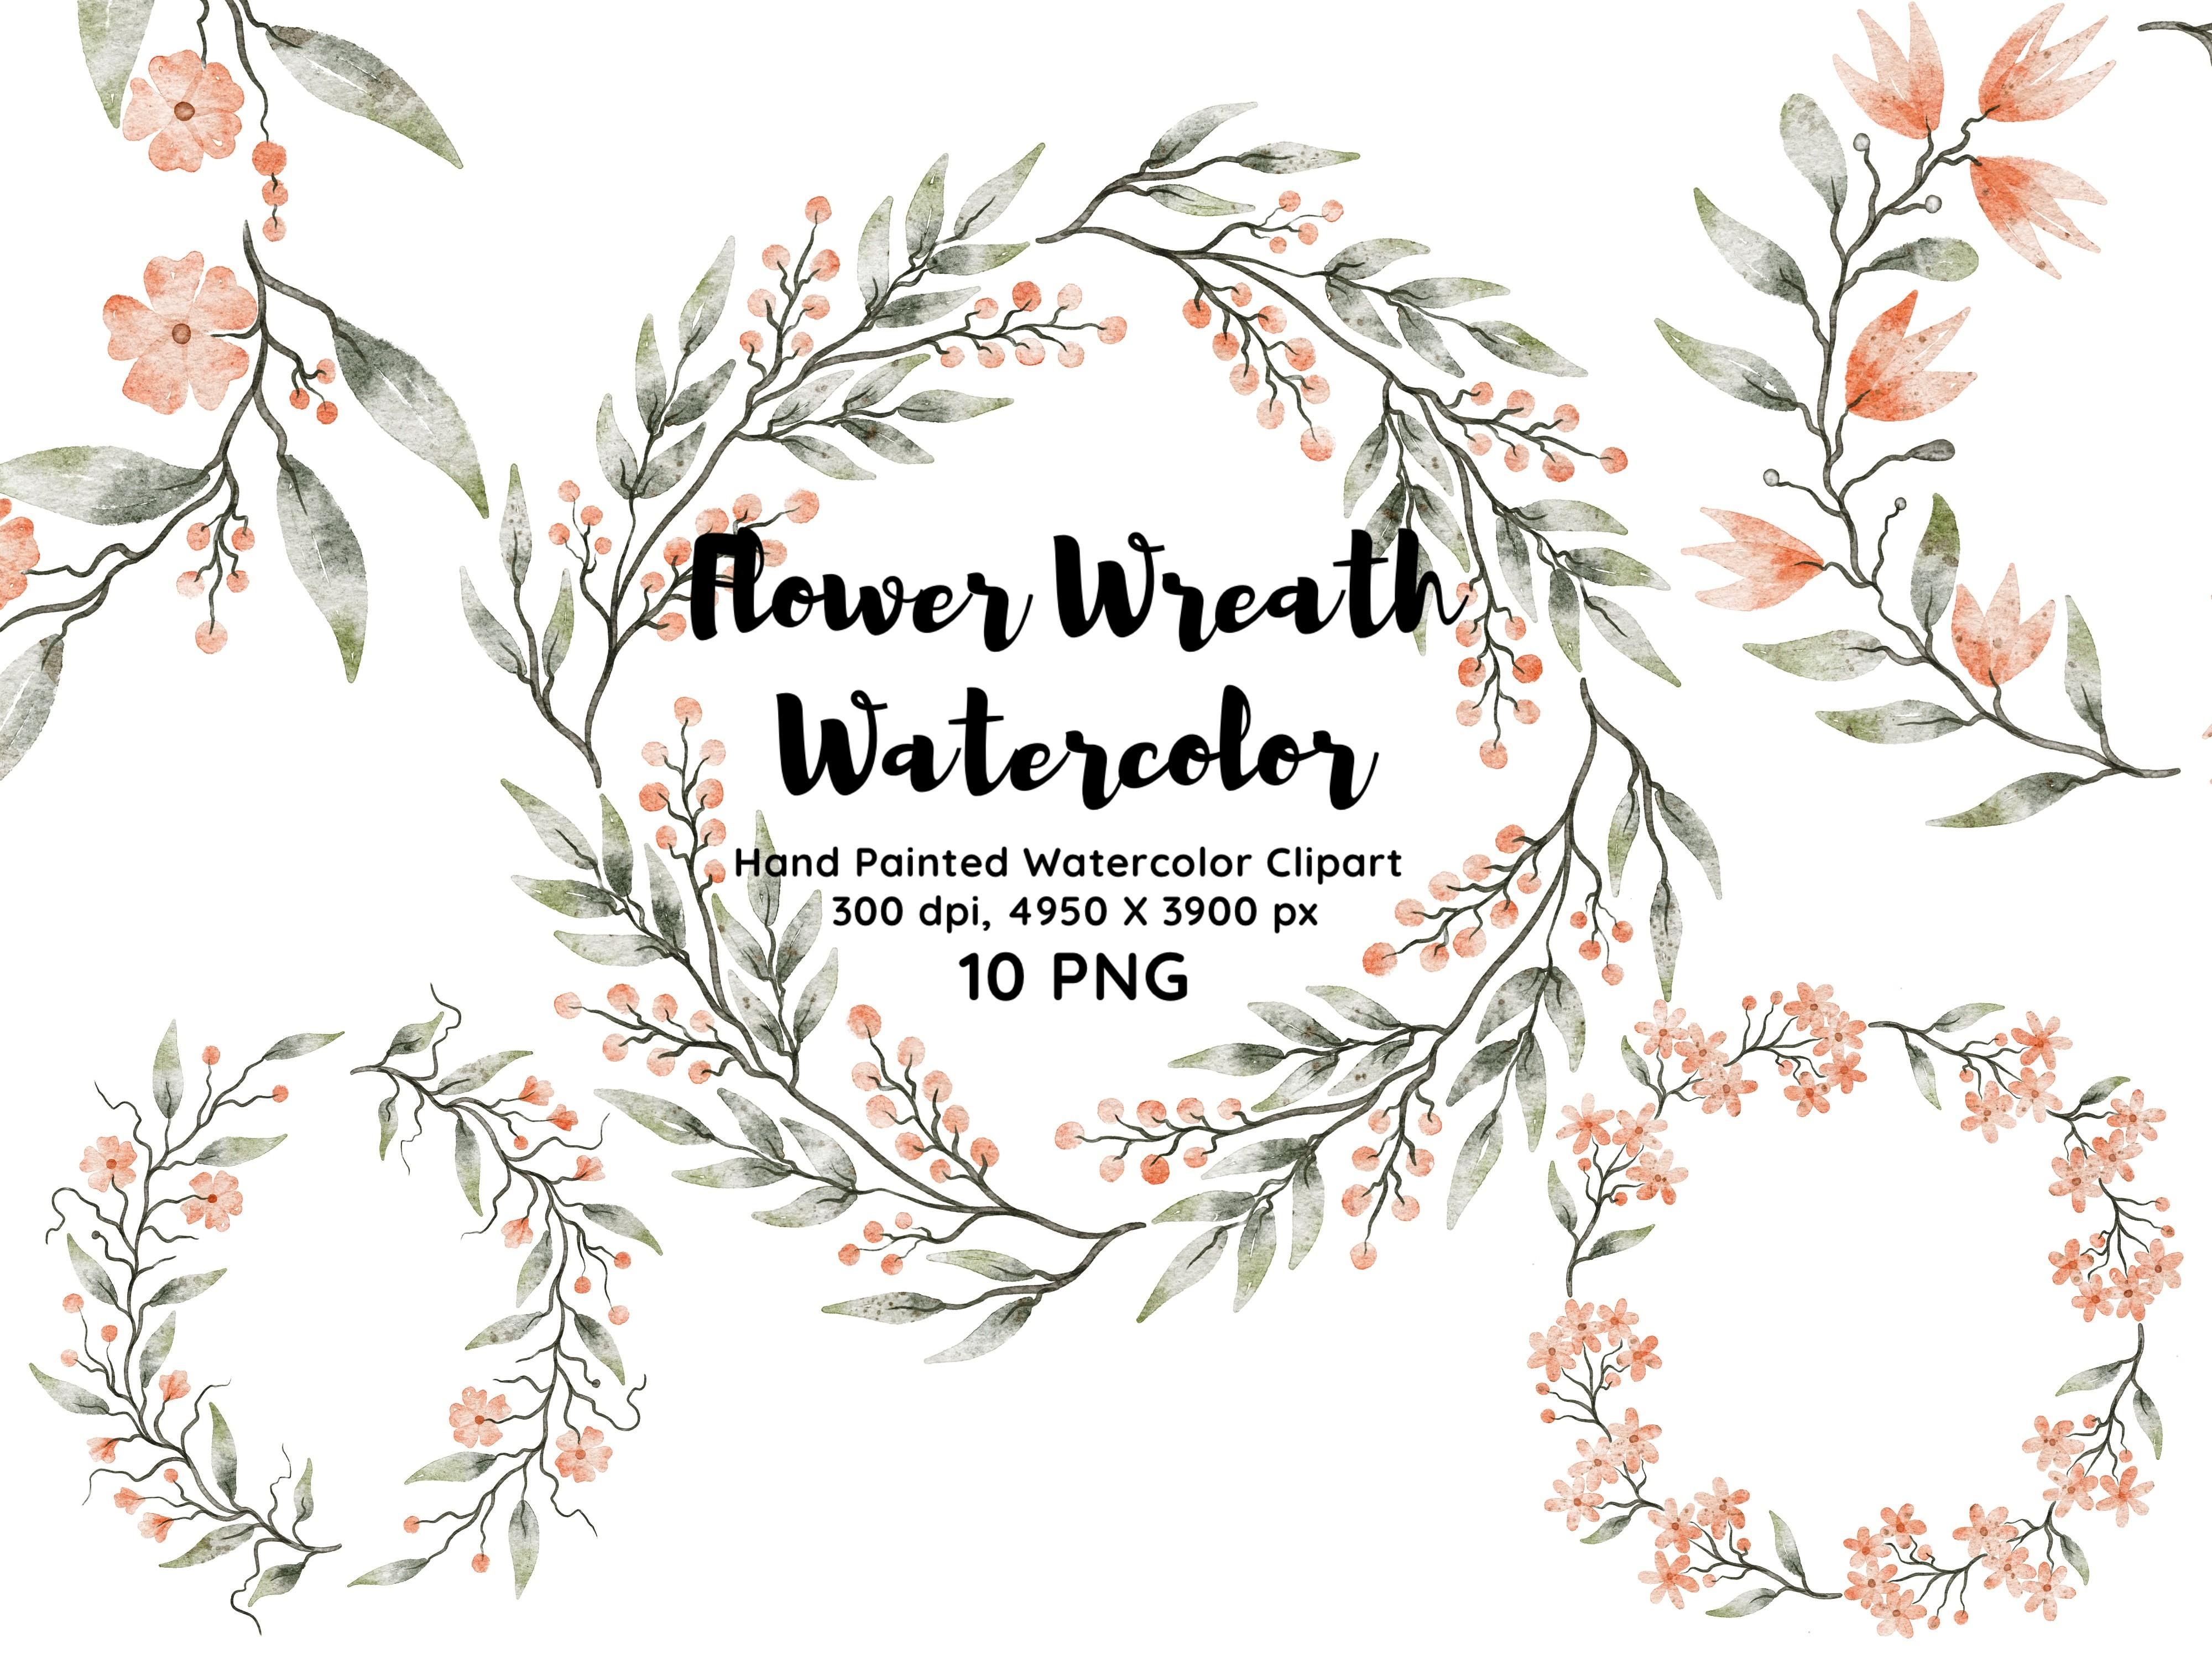 Flower Wreath Watercolor Clipart PNG